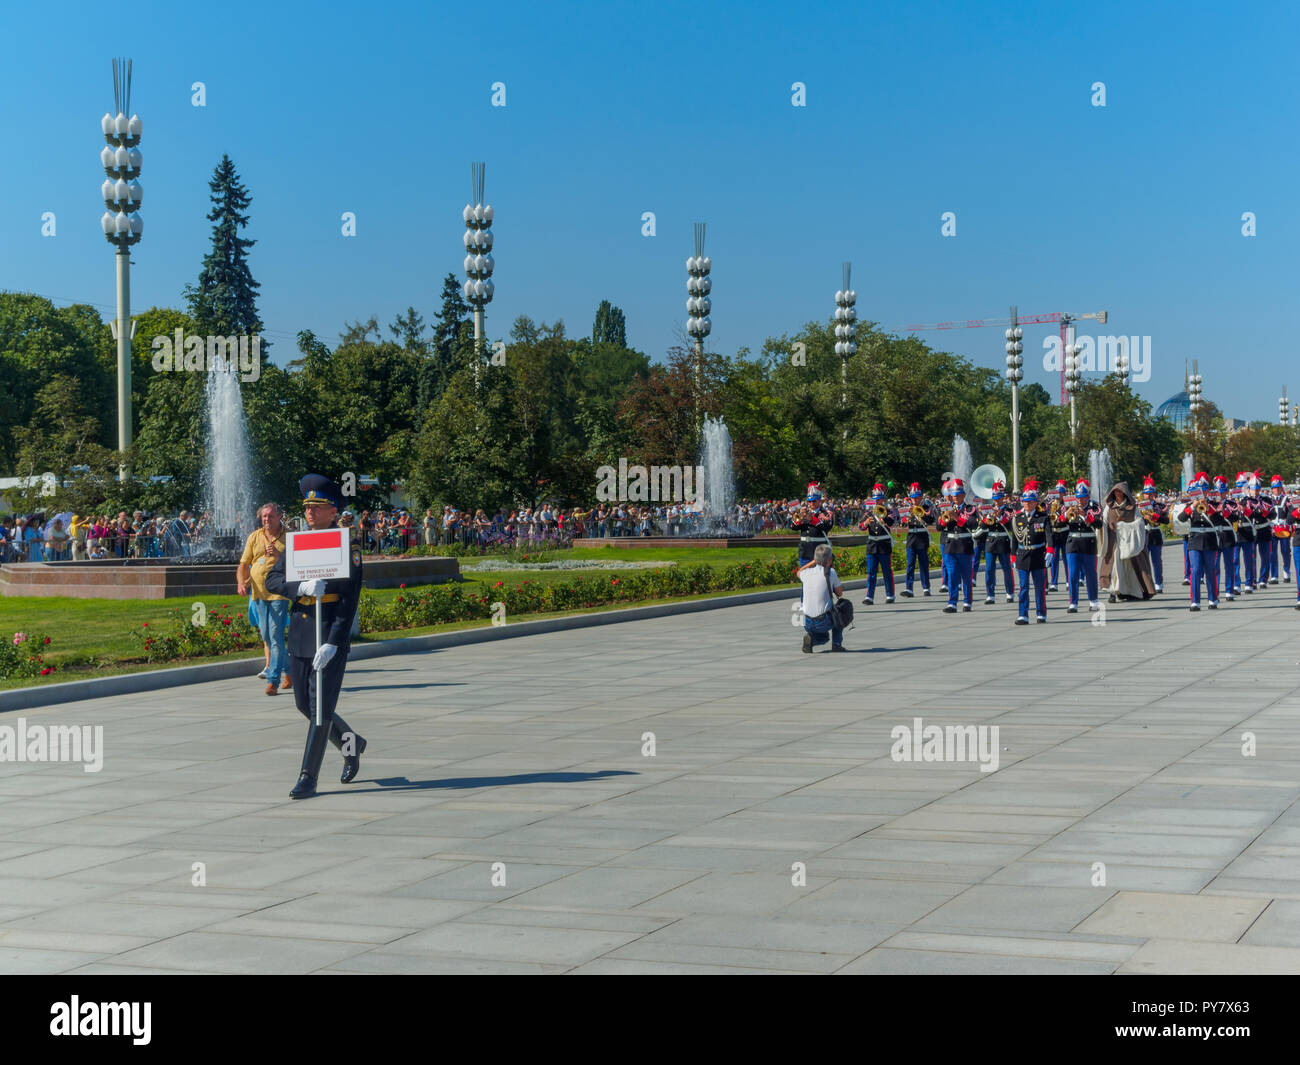 MOSCOW, RUSSIA - AUGUST 25, 2018: The festive procession of the Spasskaya Tower International Military Music Festival participants at VDNKH. Stock Photo